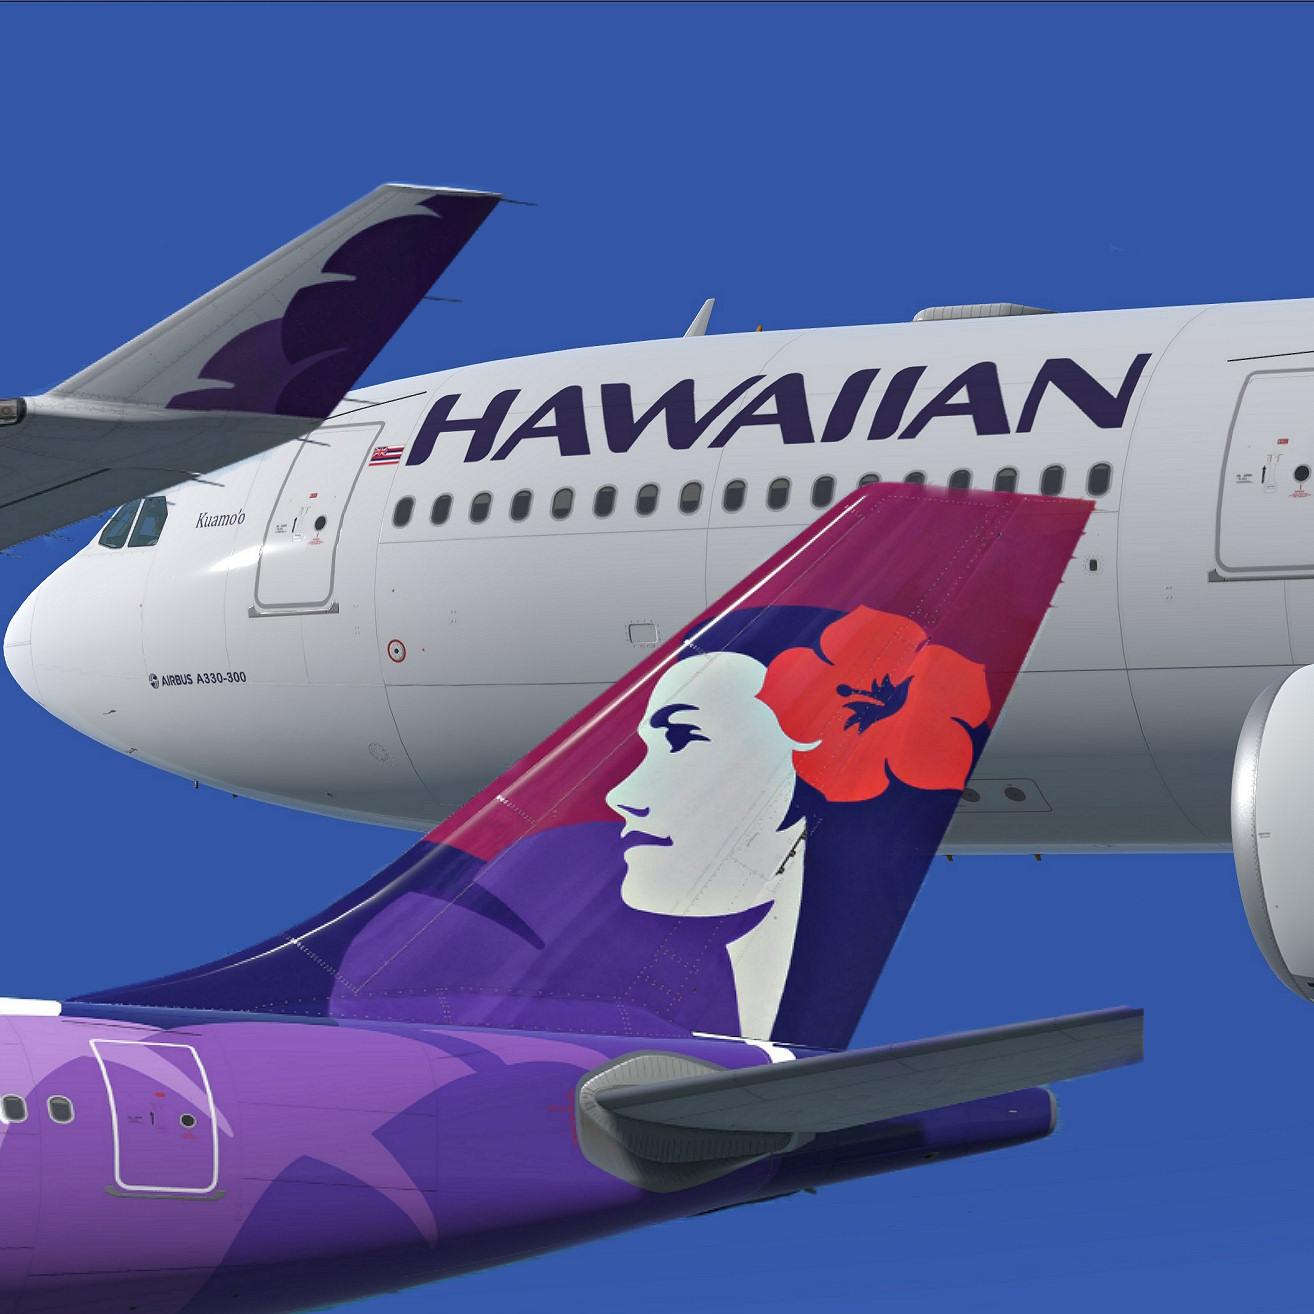 More information about "Hawaiian N370HA A330-300 RR"